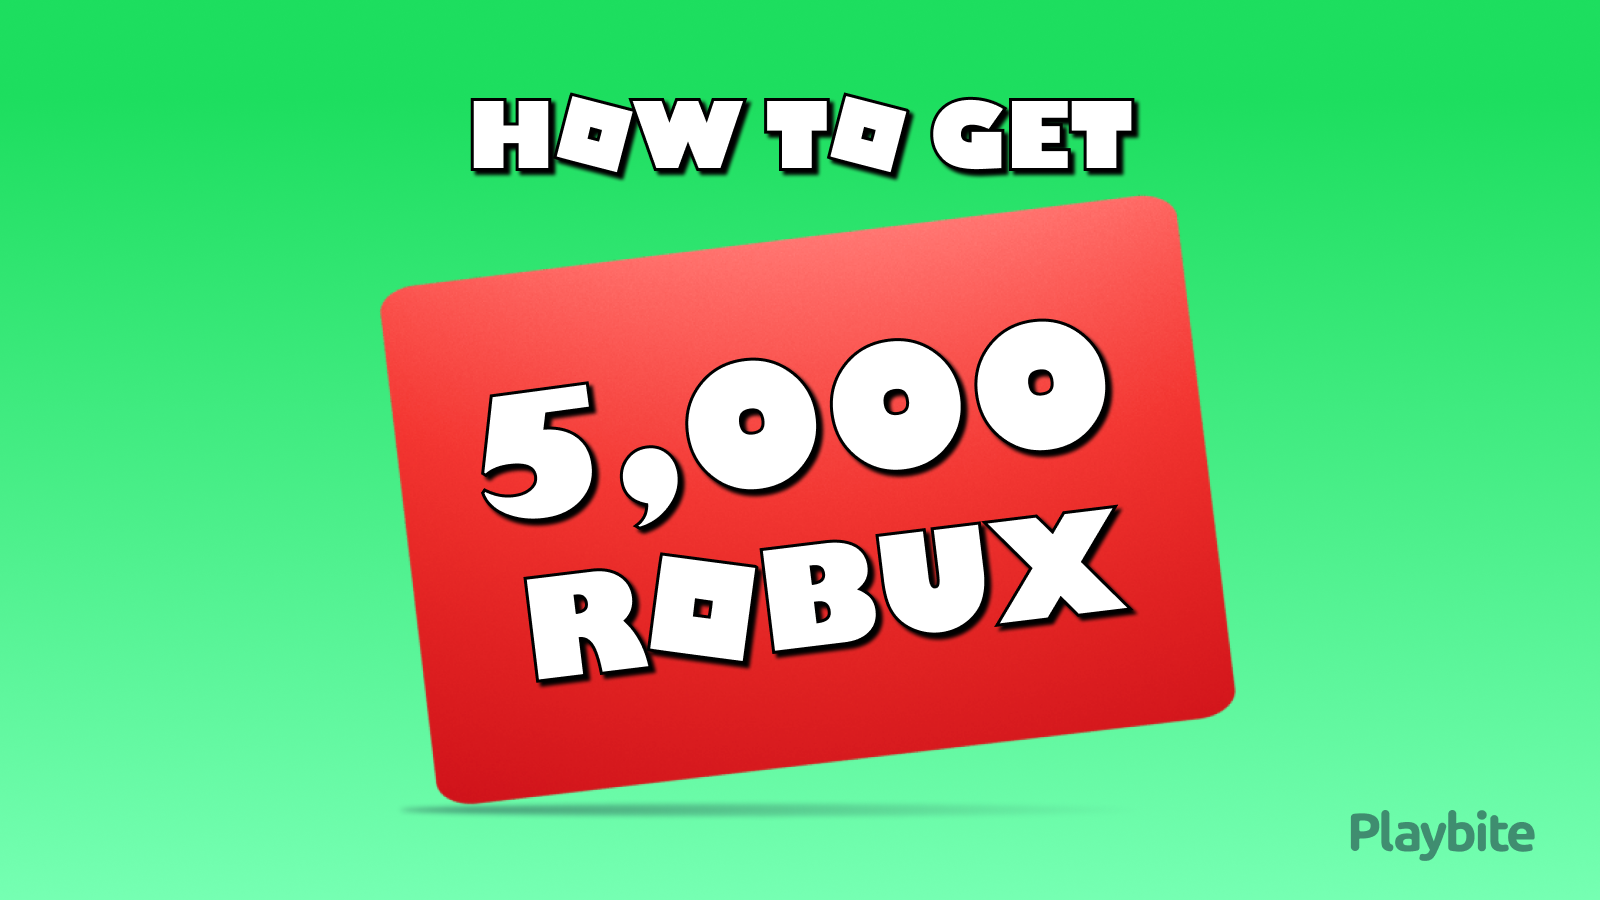 How To Get 5000 Robux For Free